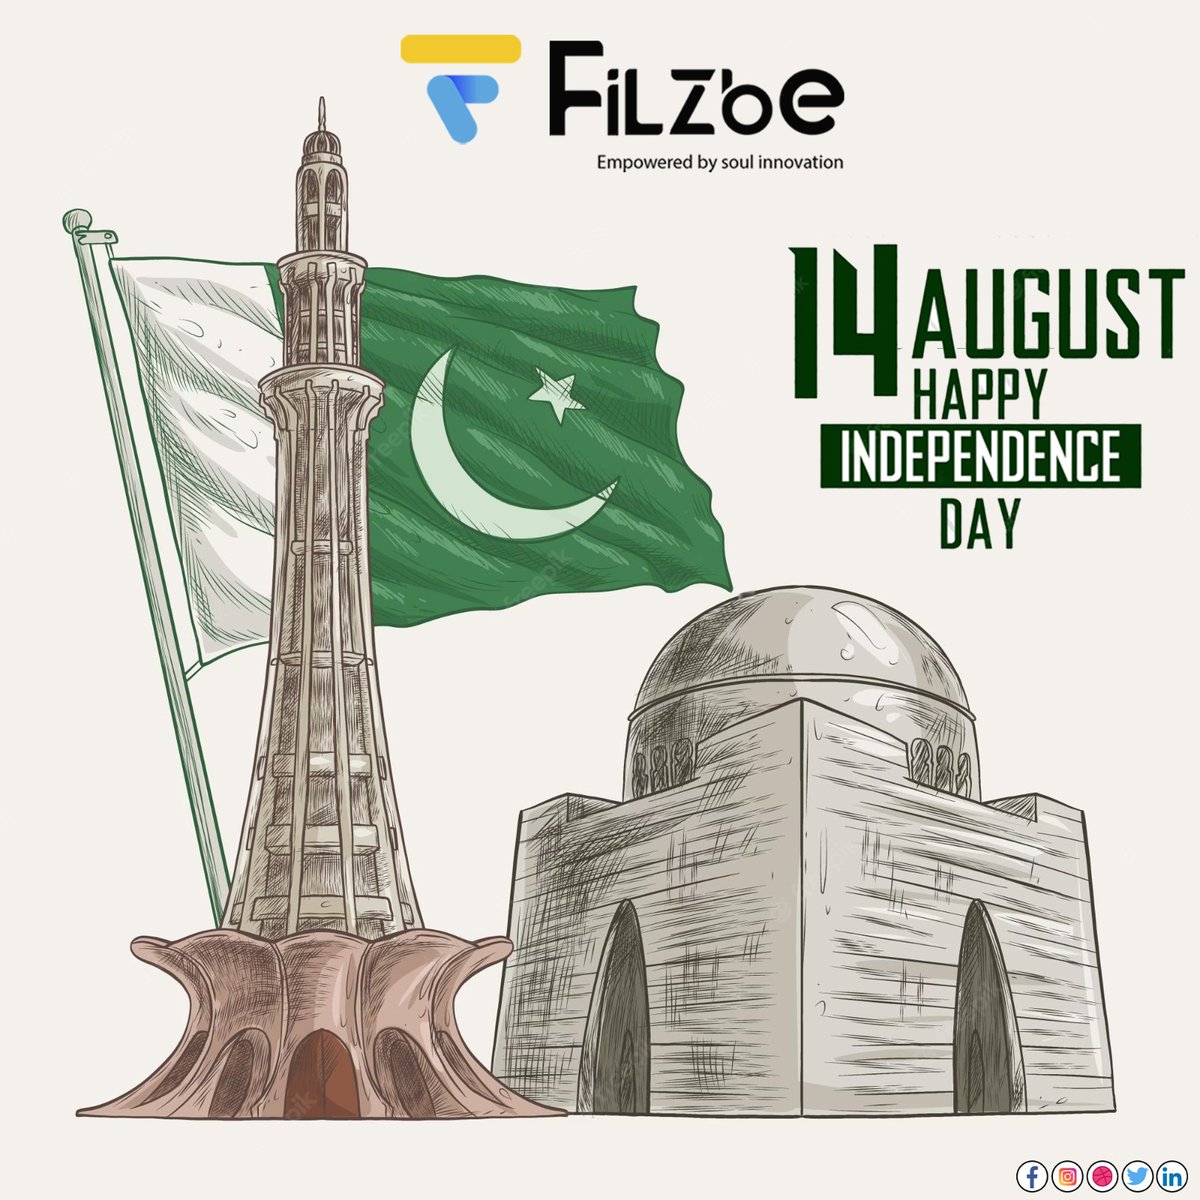 This independence Day, let's commit to uphold the values of unity, faith and discipline that steer us towards national growth.
#filzbe #filzbesouls #PakistanZindabad #HappyIndependenceDay #76thAnniversary #14thAugust #HappyIndependenceDay2023